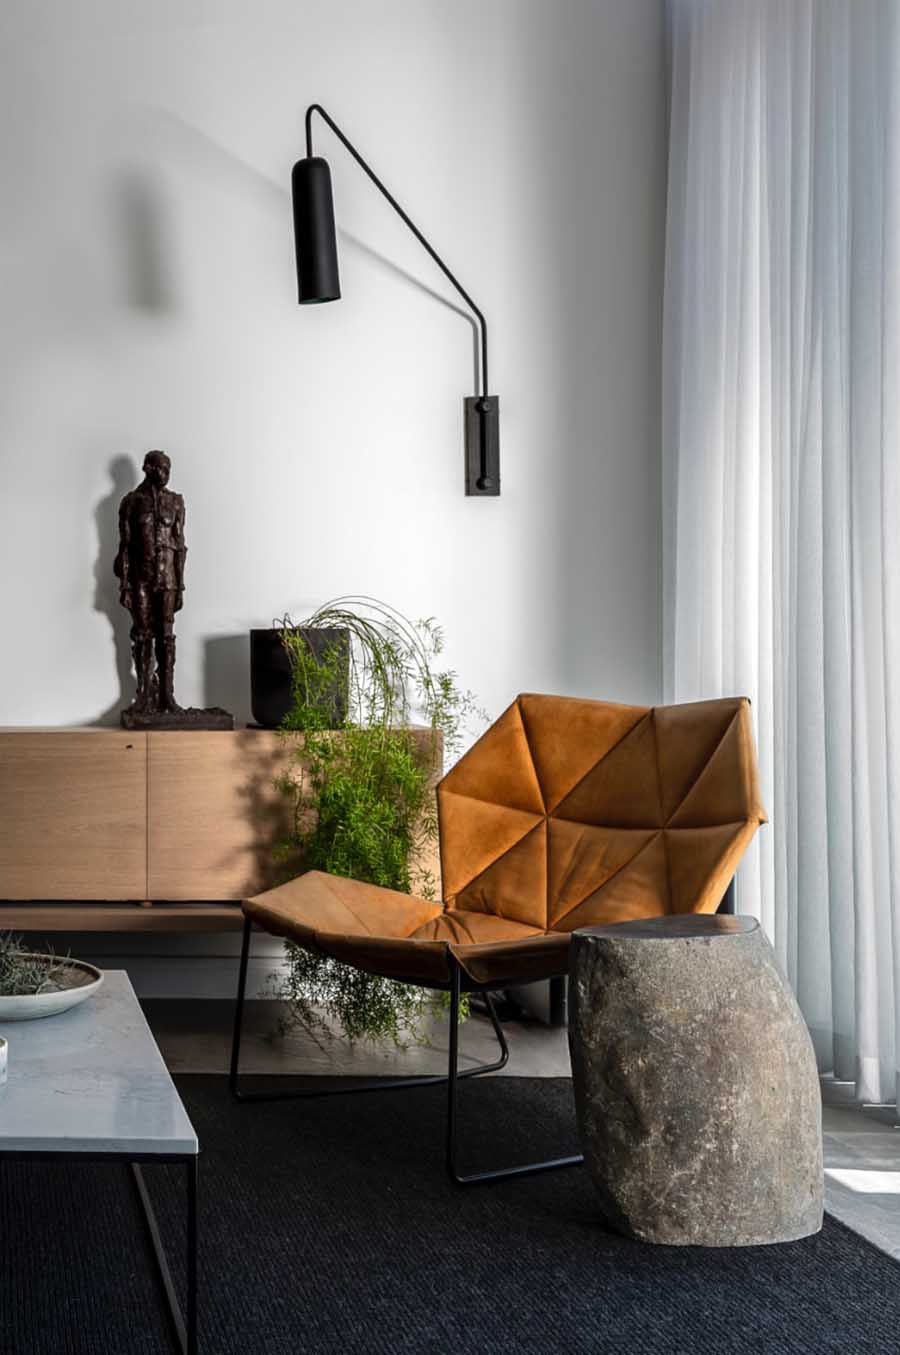 GSqaured Architects Tamboerskloof Home Tour